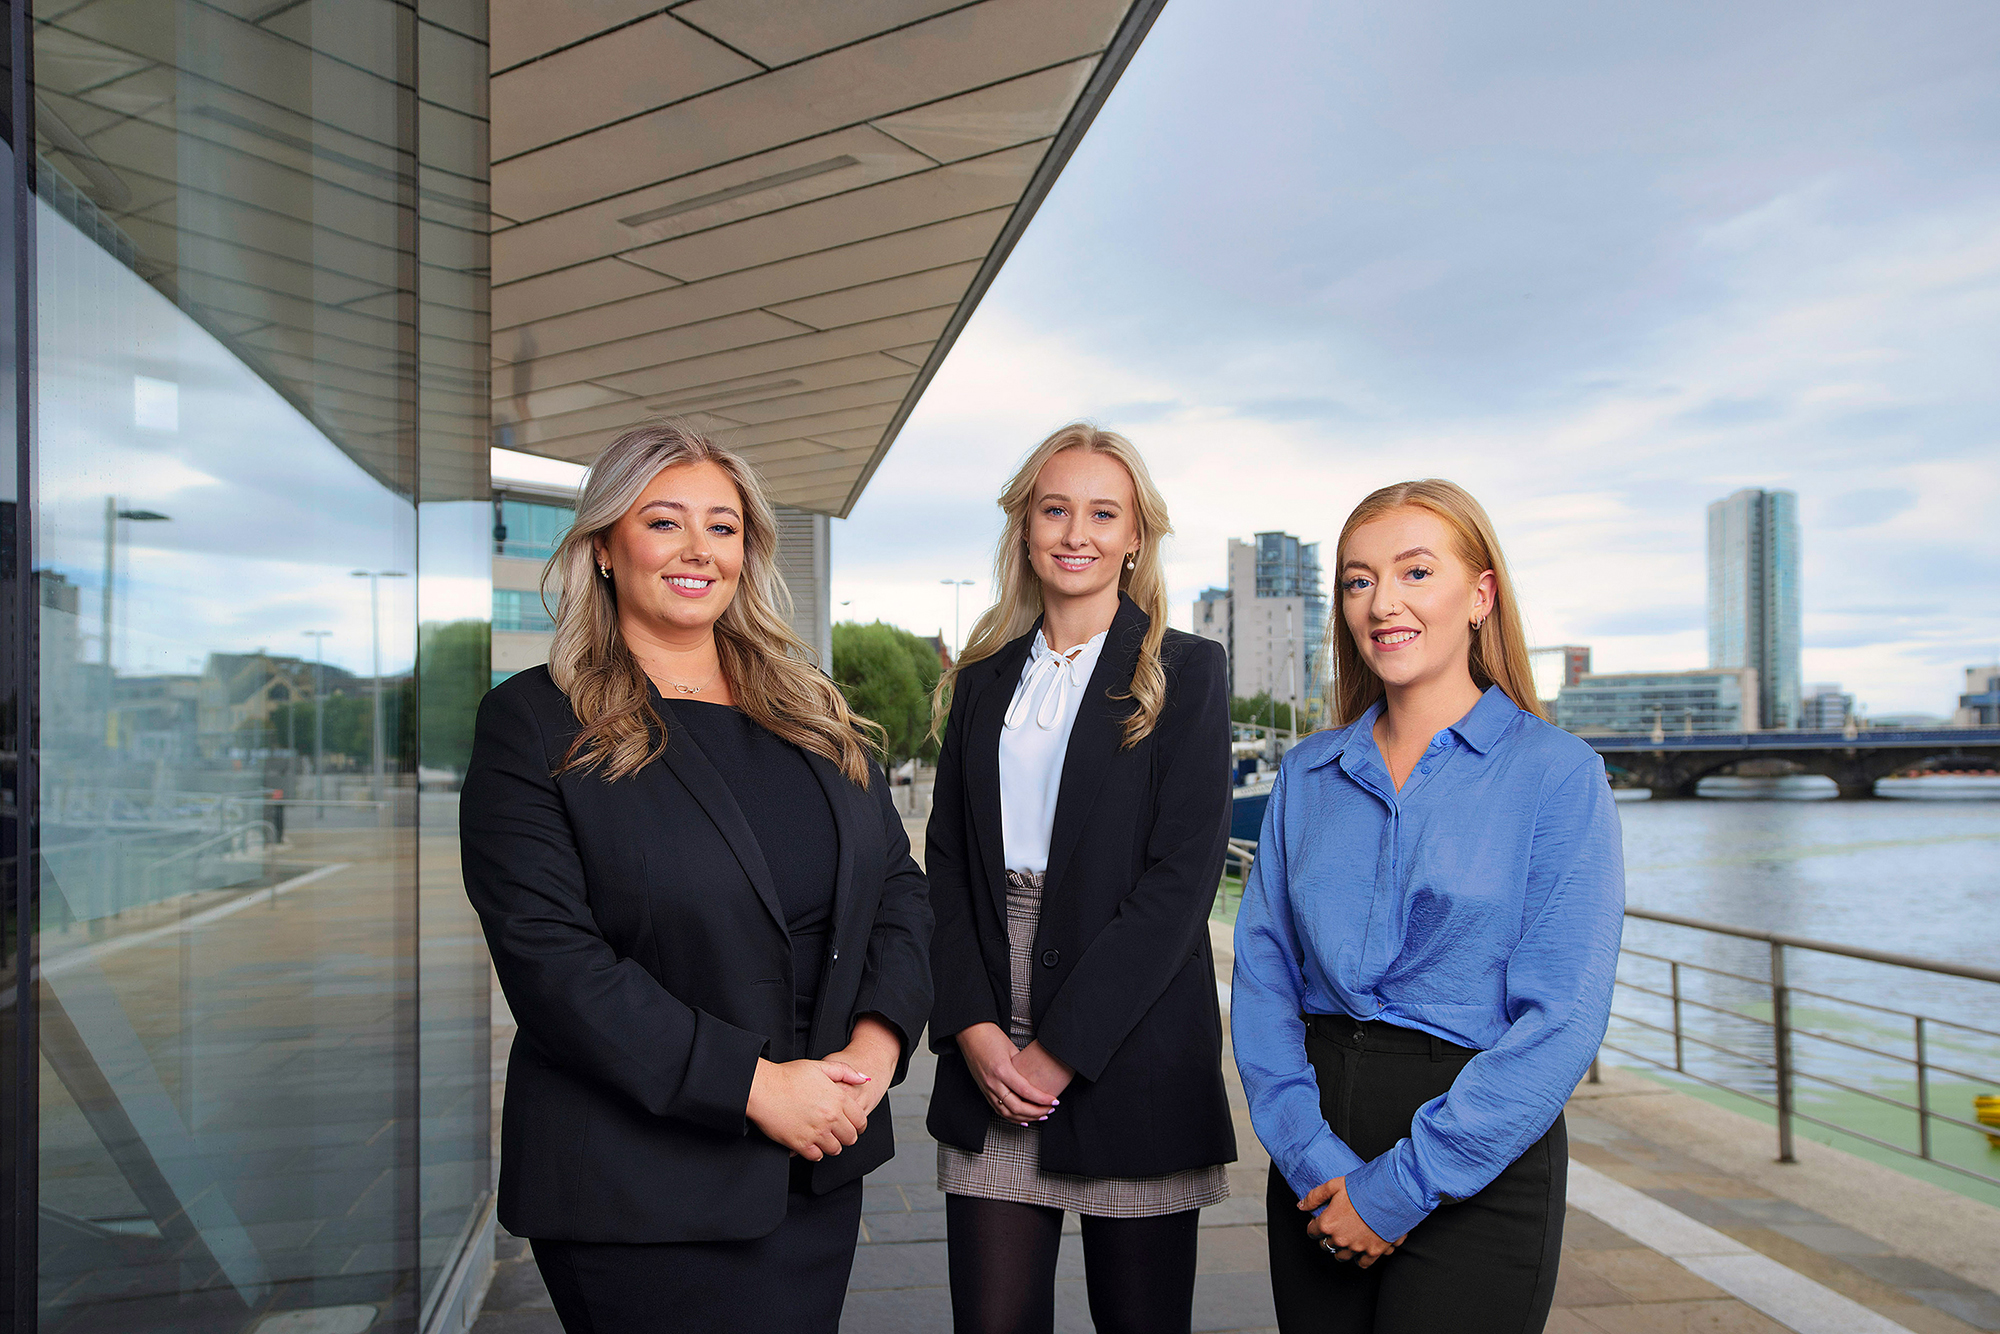 MKB Law welcomes three new trainee solicitors